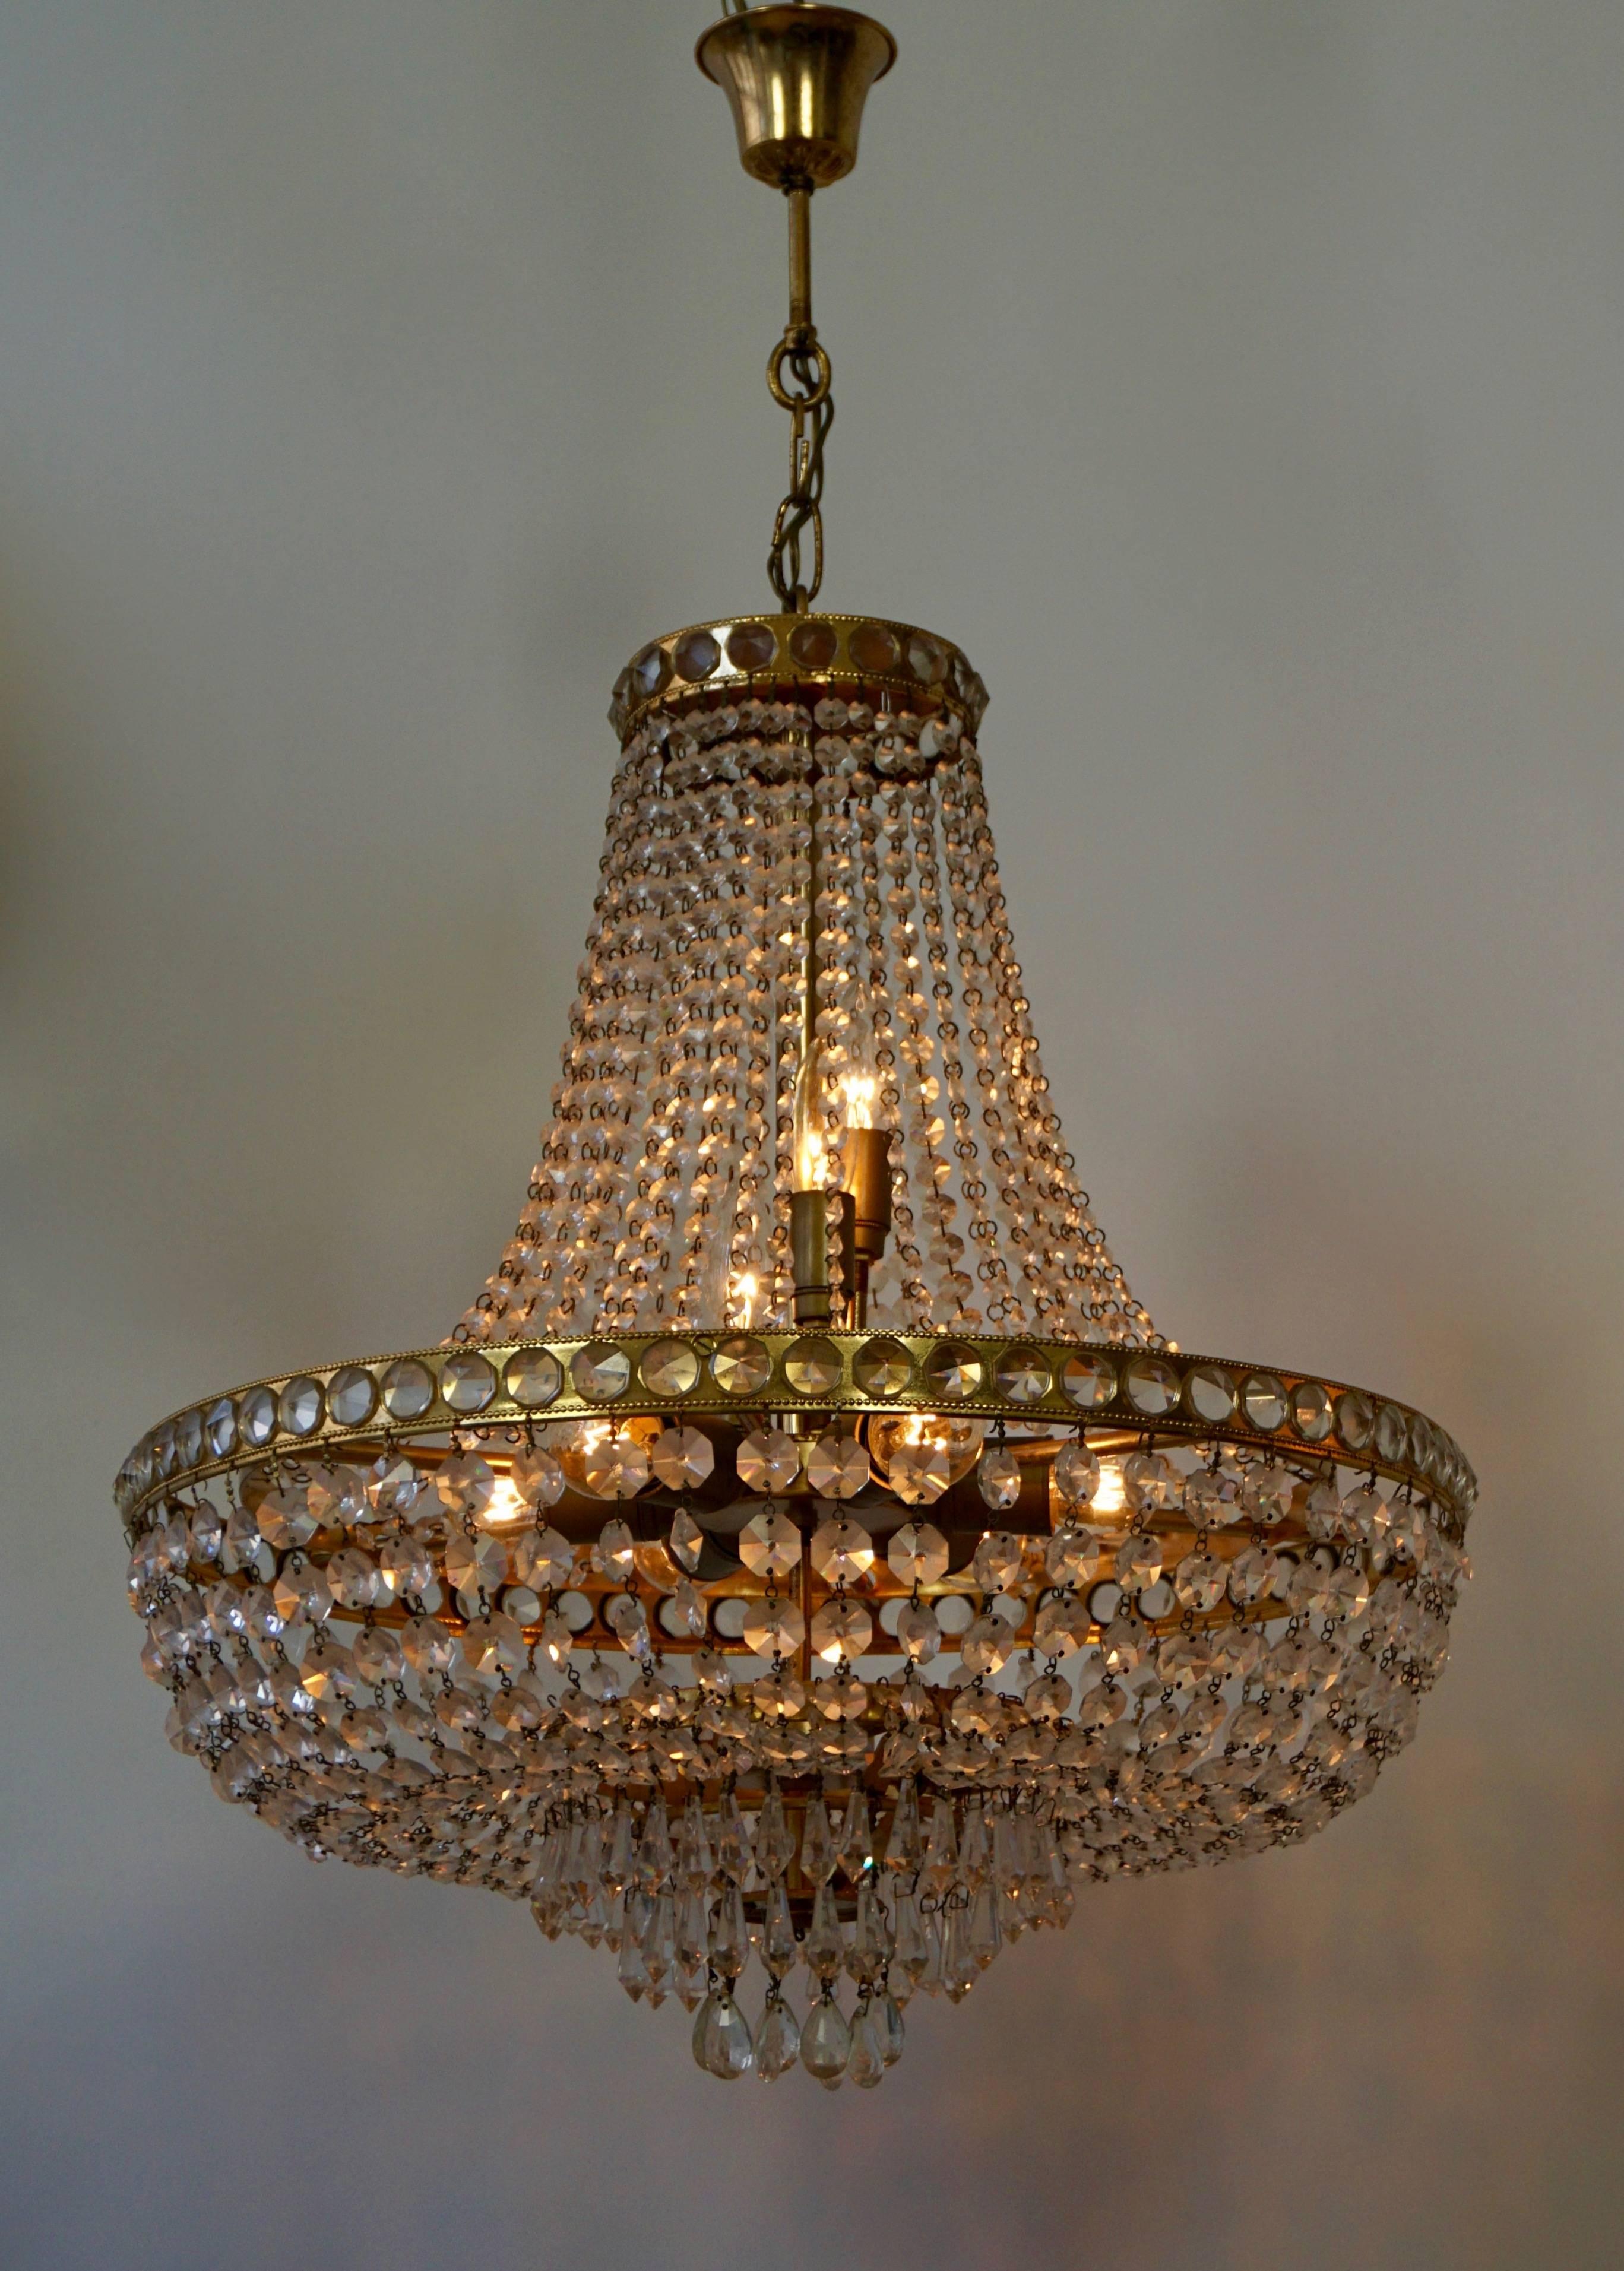 Crystal basket chandelier.
Measure: Total height with the chain is 85 cm.